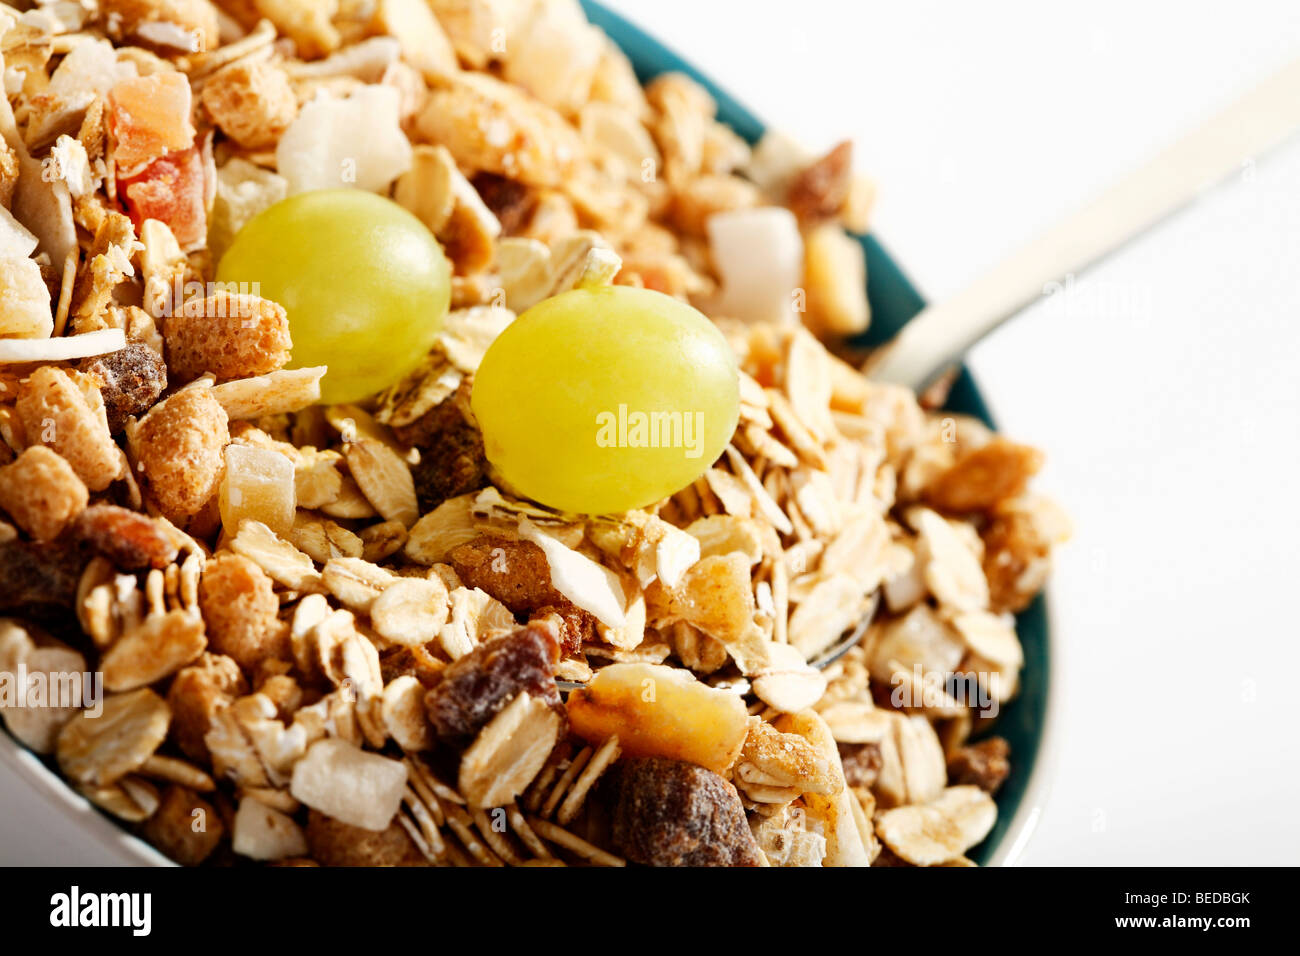 Fruit musli and grapes in a bowl Stock Photo